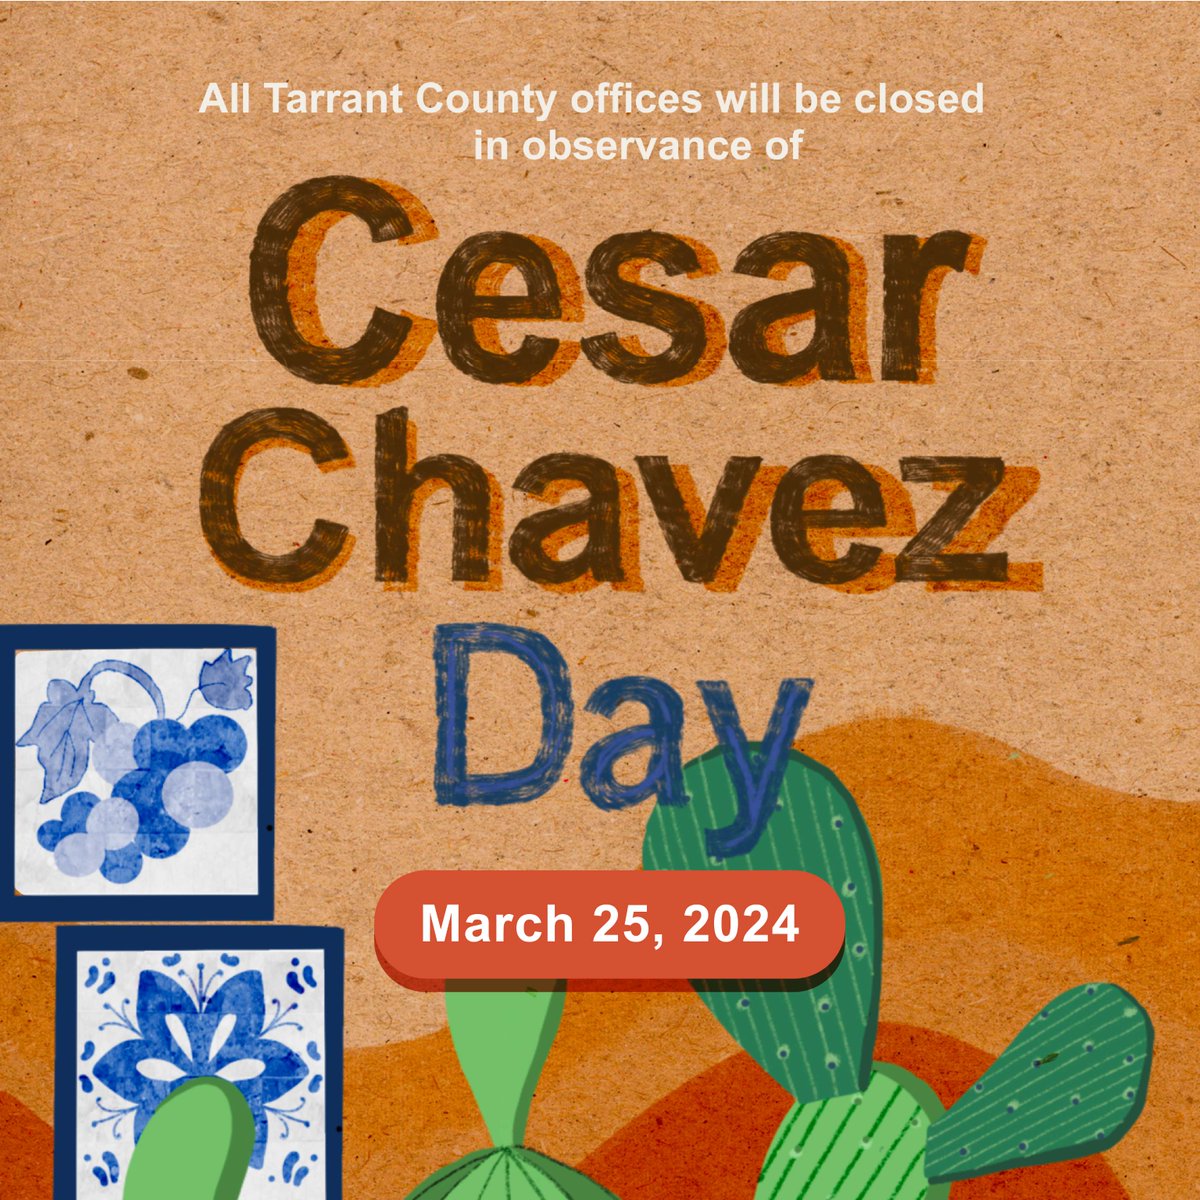 All Tarrant County Offices will be closed Monday, March 25, 2024, in observance of Cesar Chavez Day.